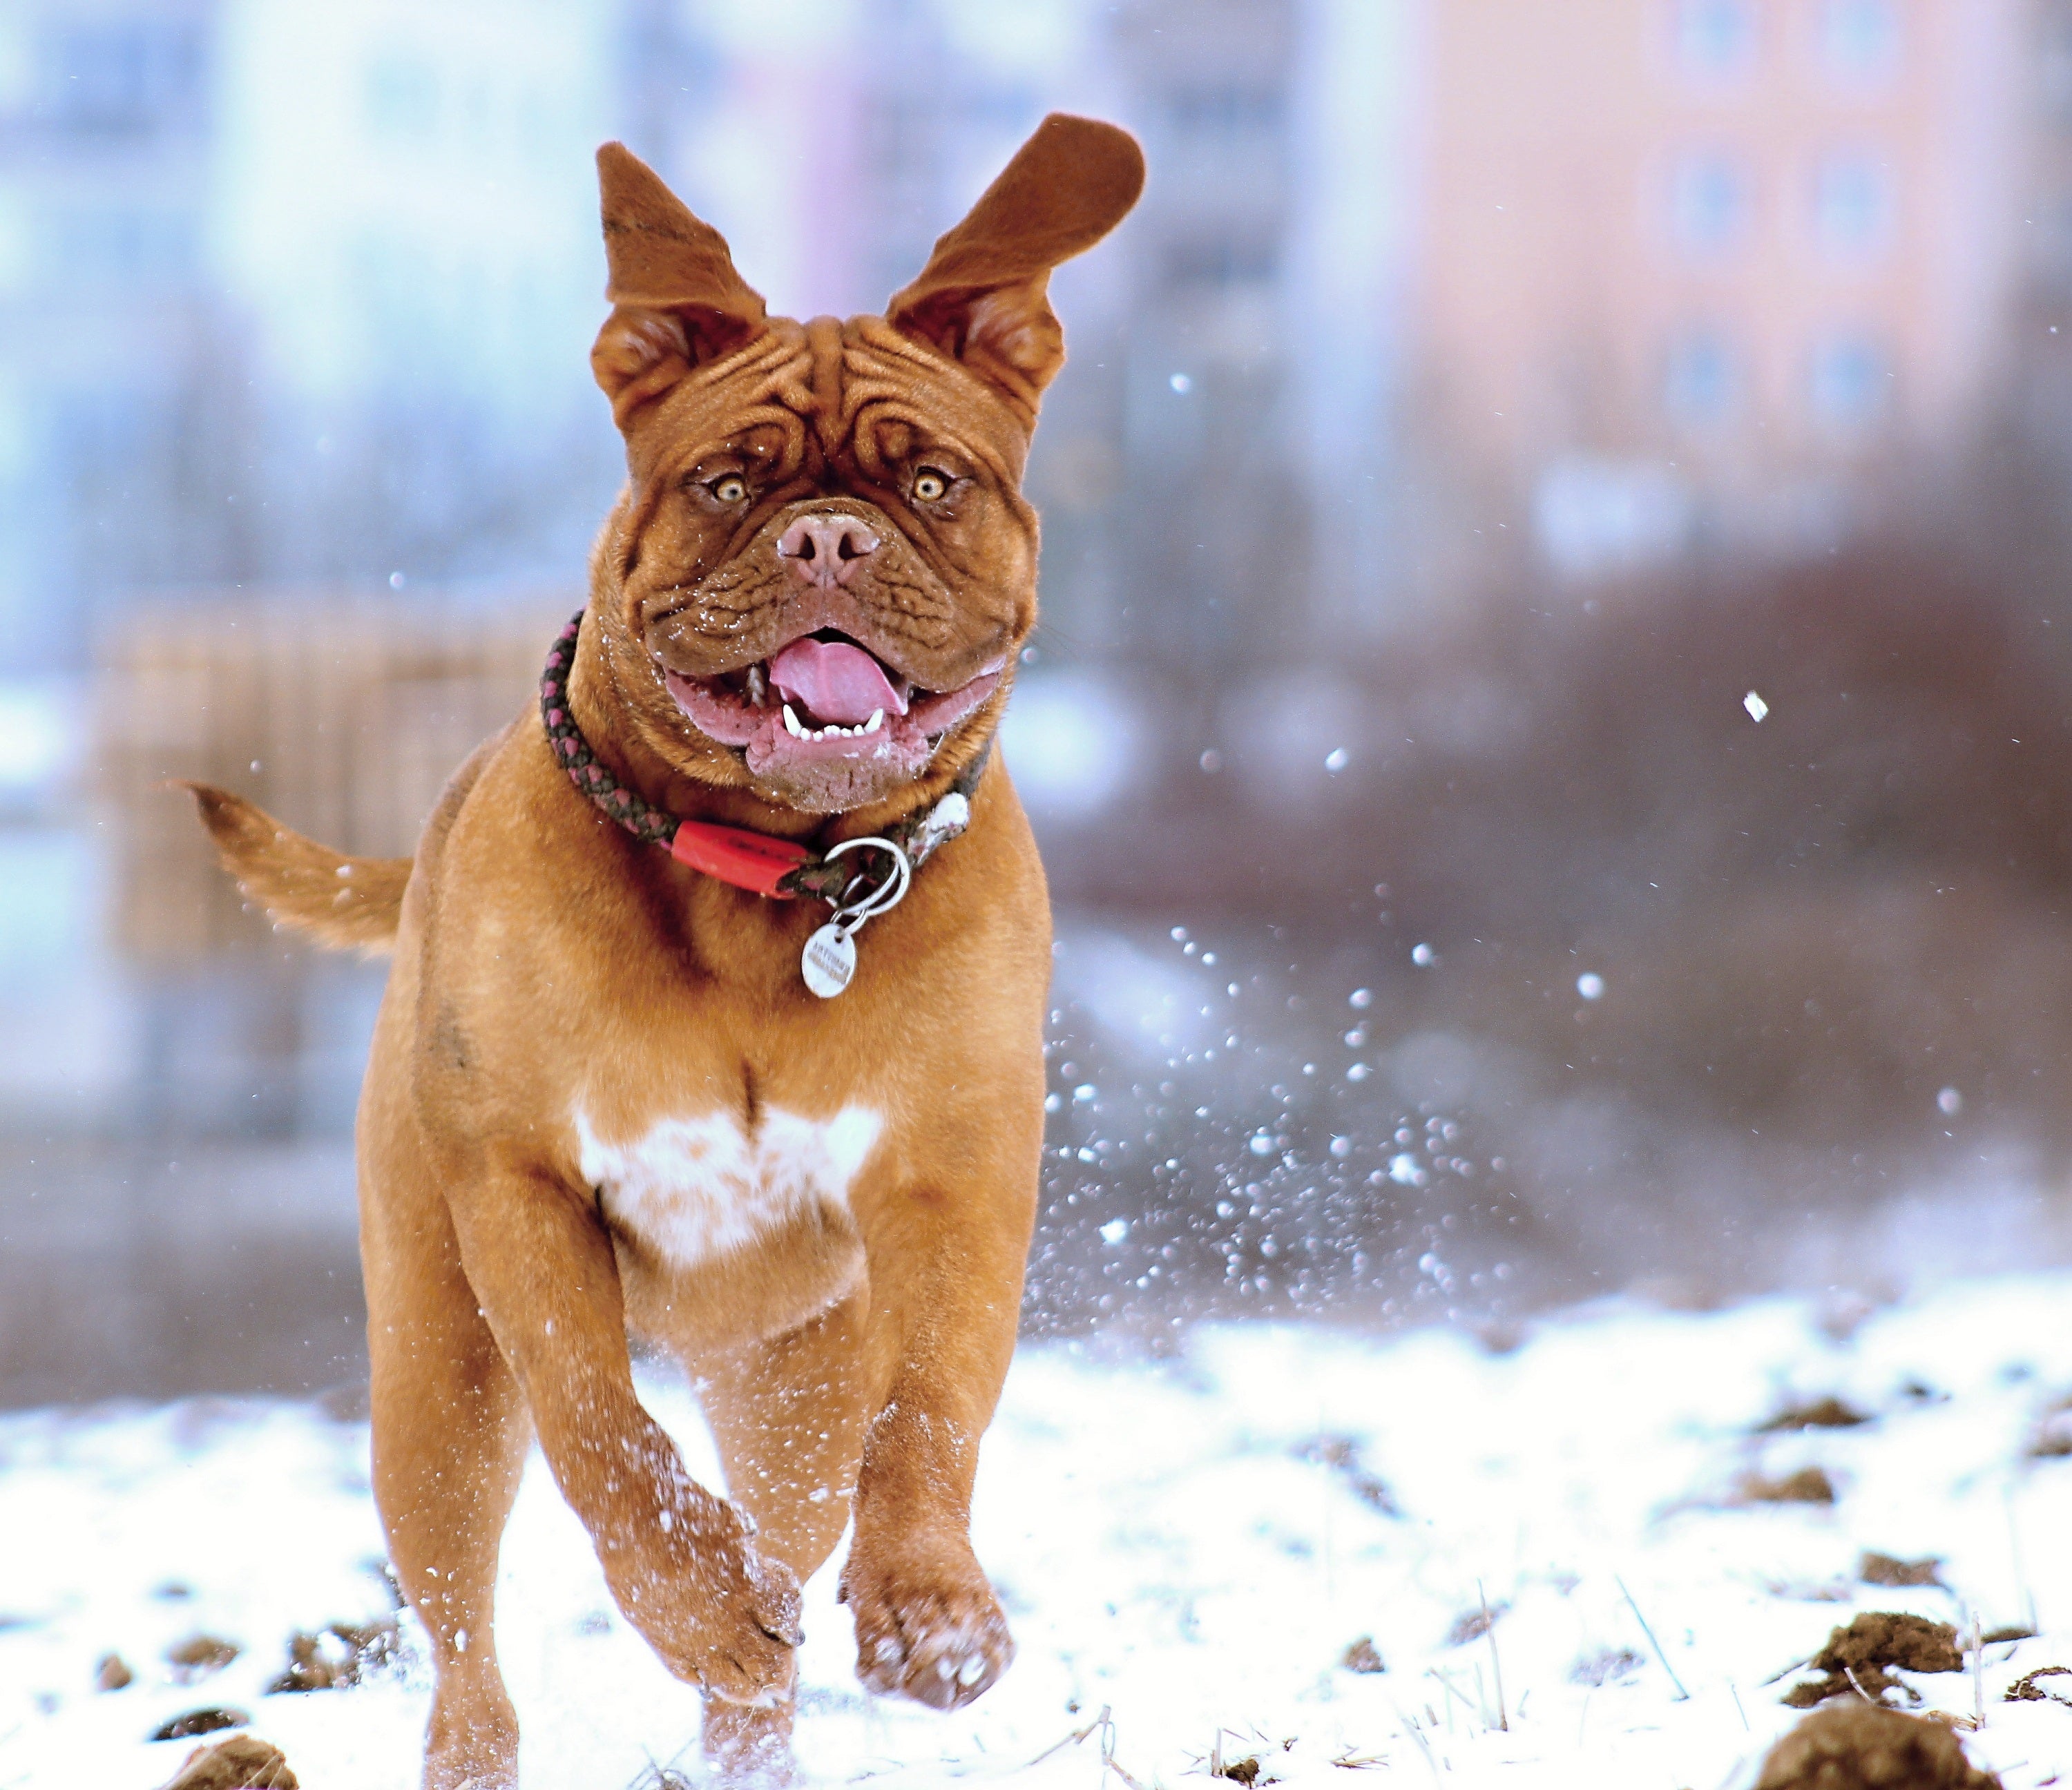 HOW WOOFS TREATS CAN HELP SUPPORT YOUR DOG'S HEALTH DURING THE WINTER MONTHS